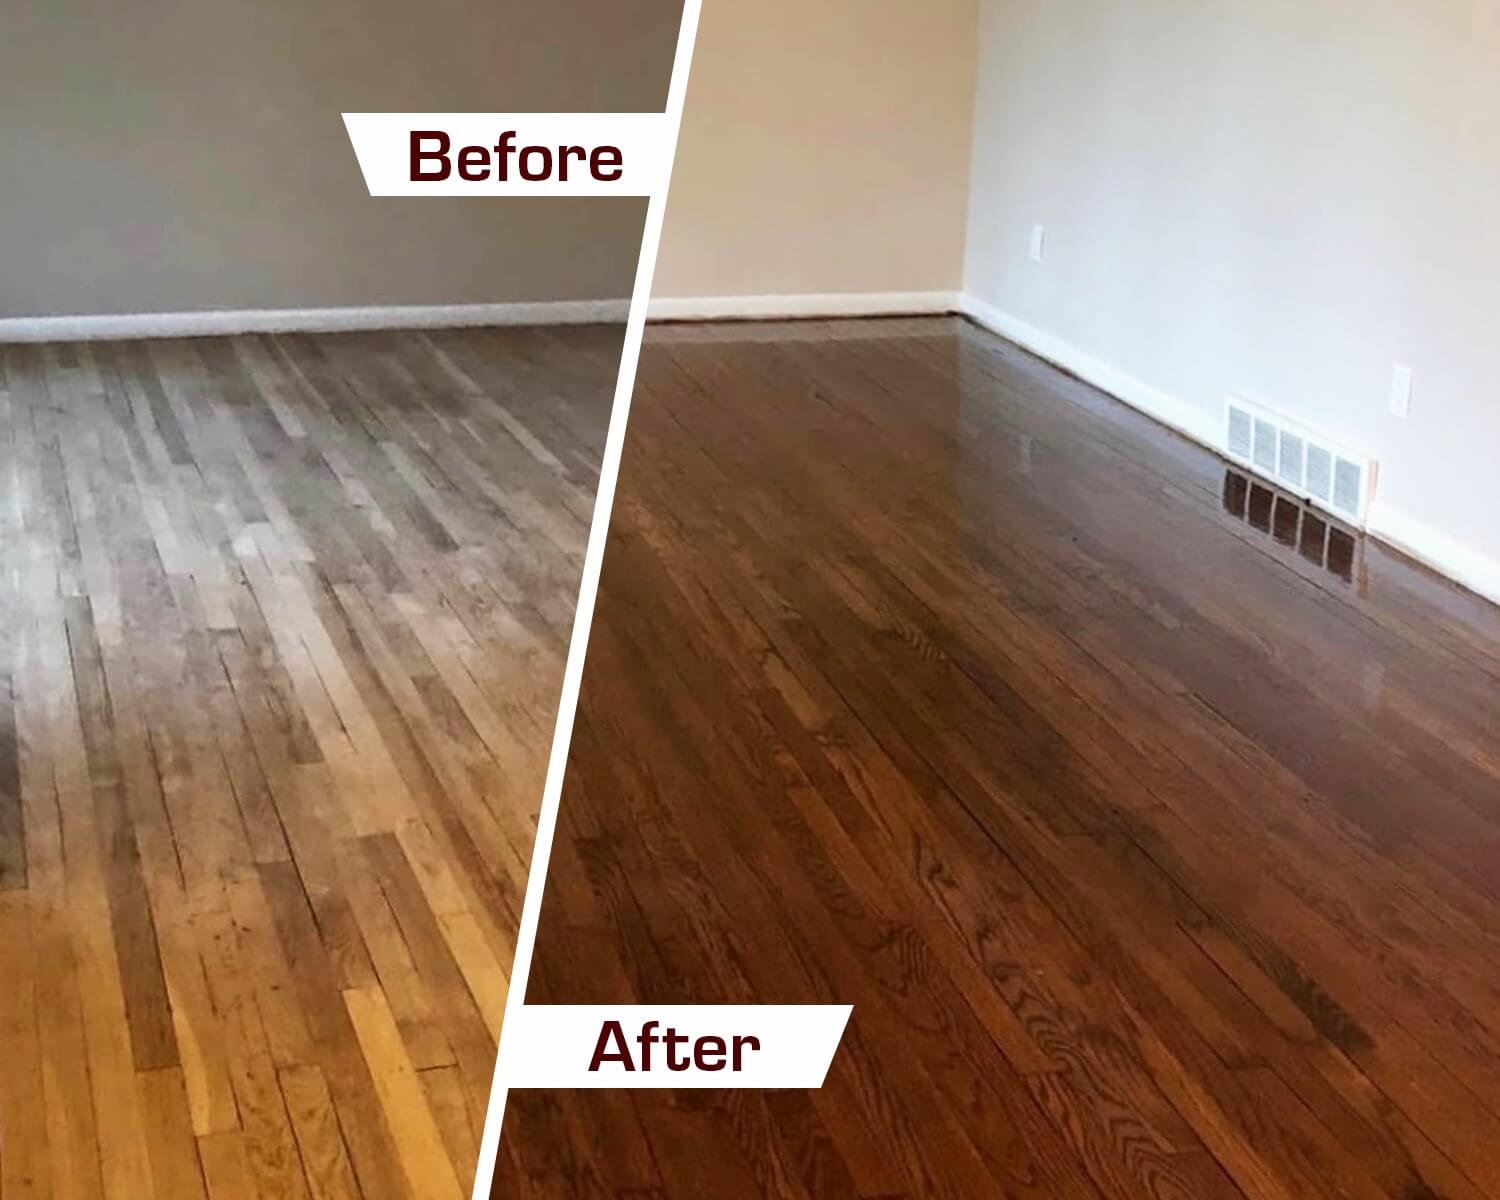 Before and after hardwood floor refinishing in Chicago, IL